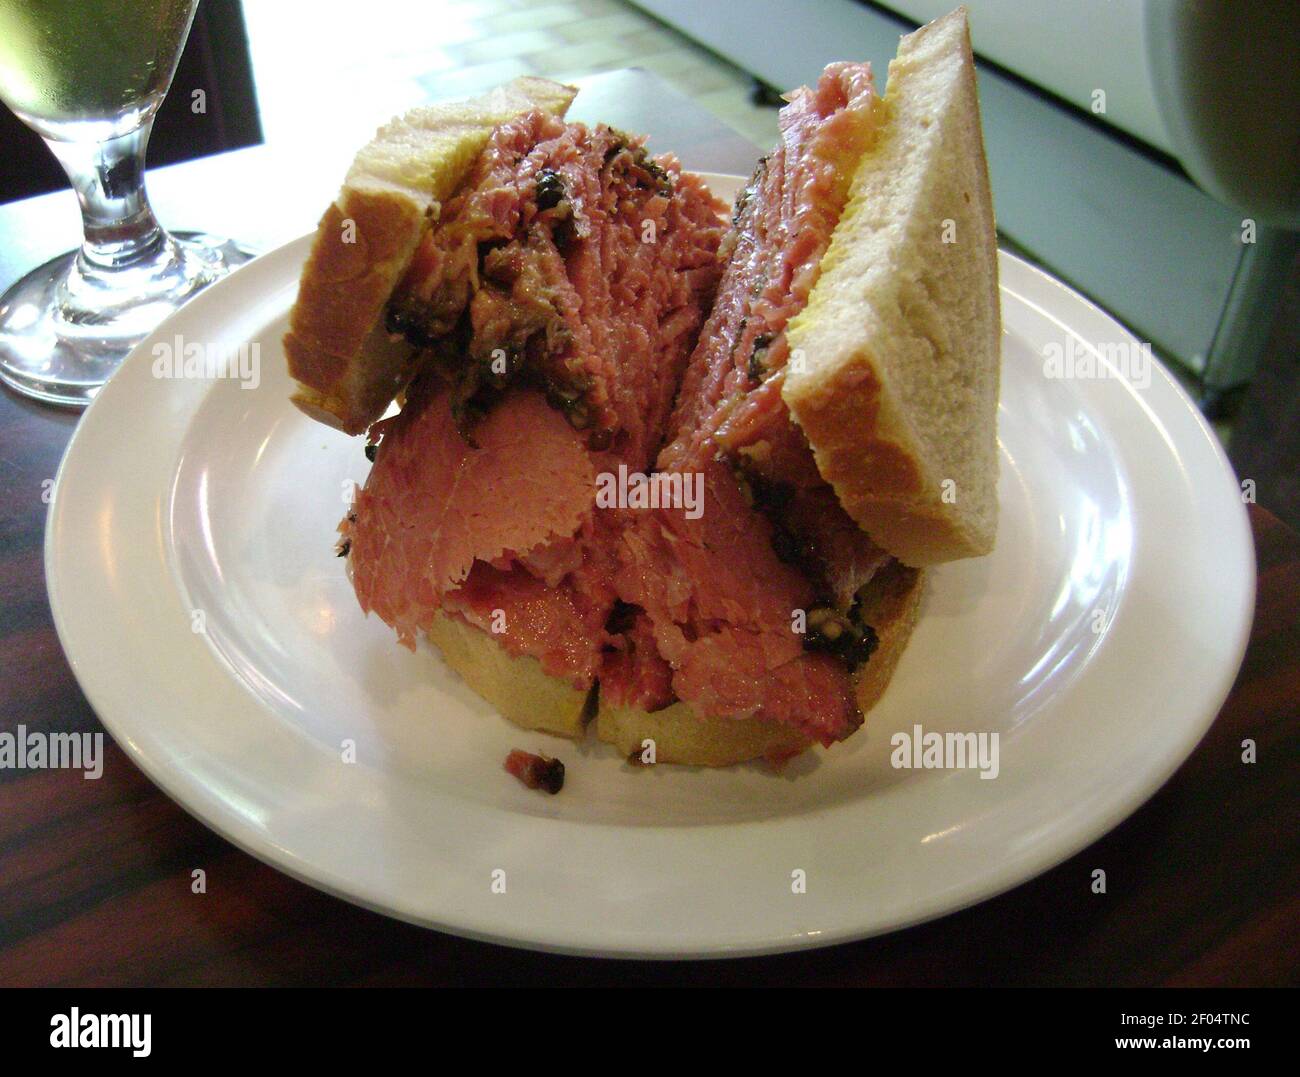 https://c8.alamy.com/comp/2F04TNC/tender-beef-brisket-and-a-fresh-rye-bread-make-up-the-meat-sandwich-at-the-main-in-montrea-canada-photo-by-monica-engchicago-tribunemctsipa-usa-2F04TNC.jpg